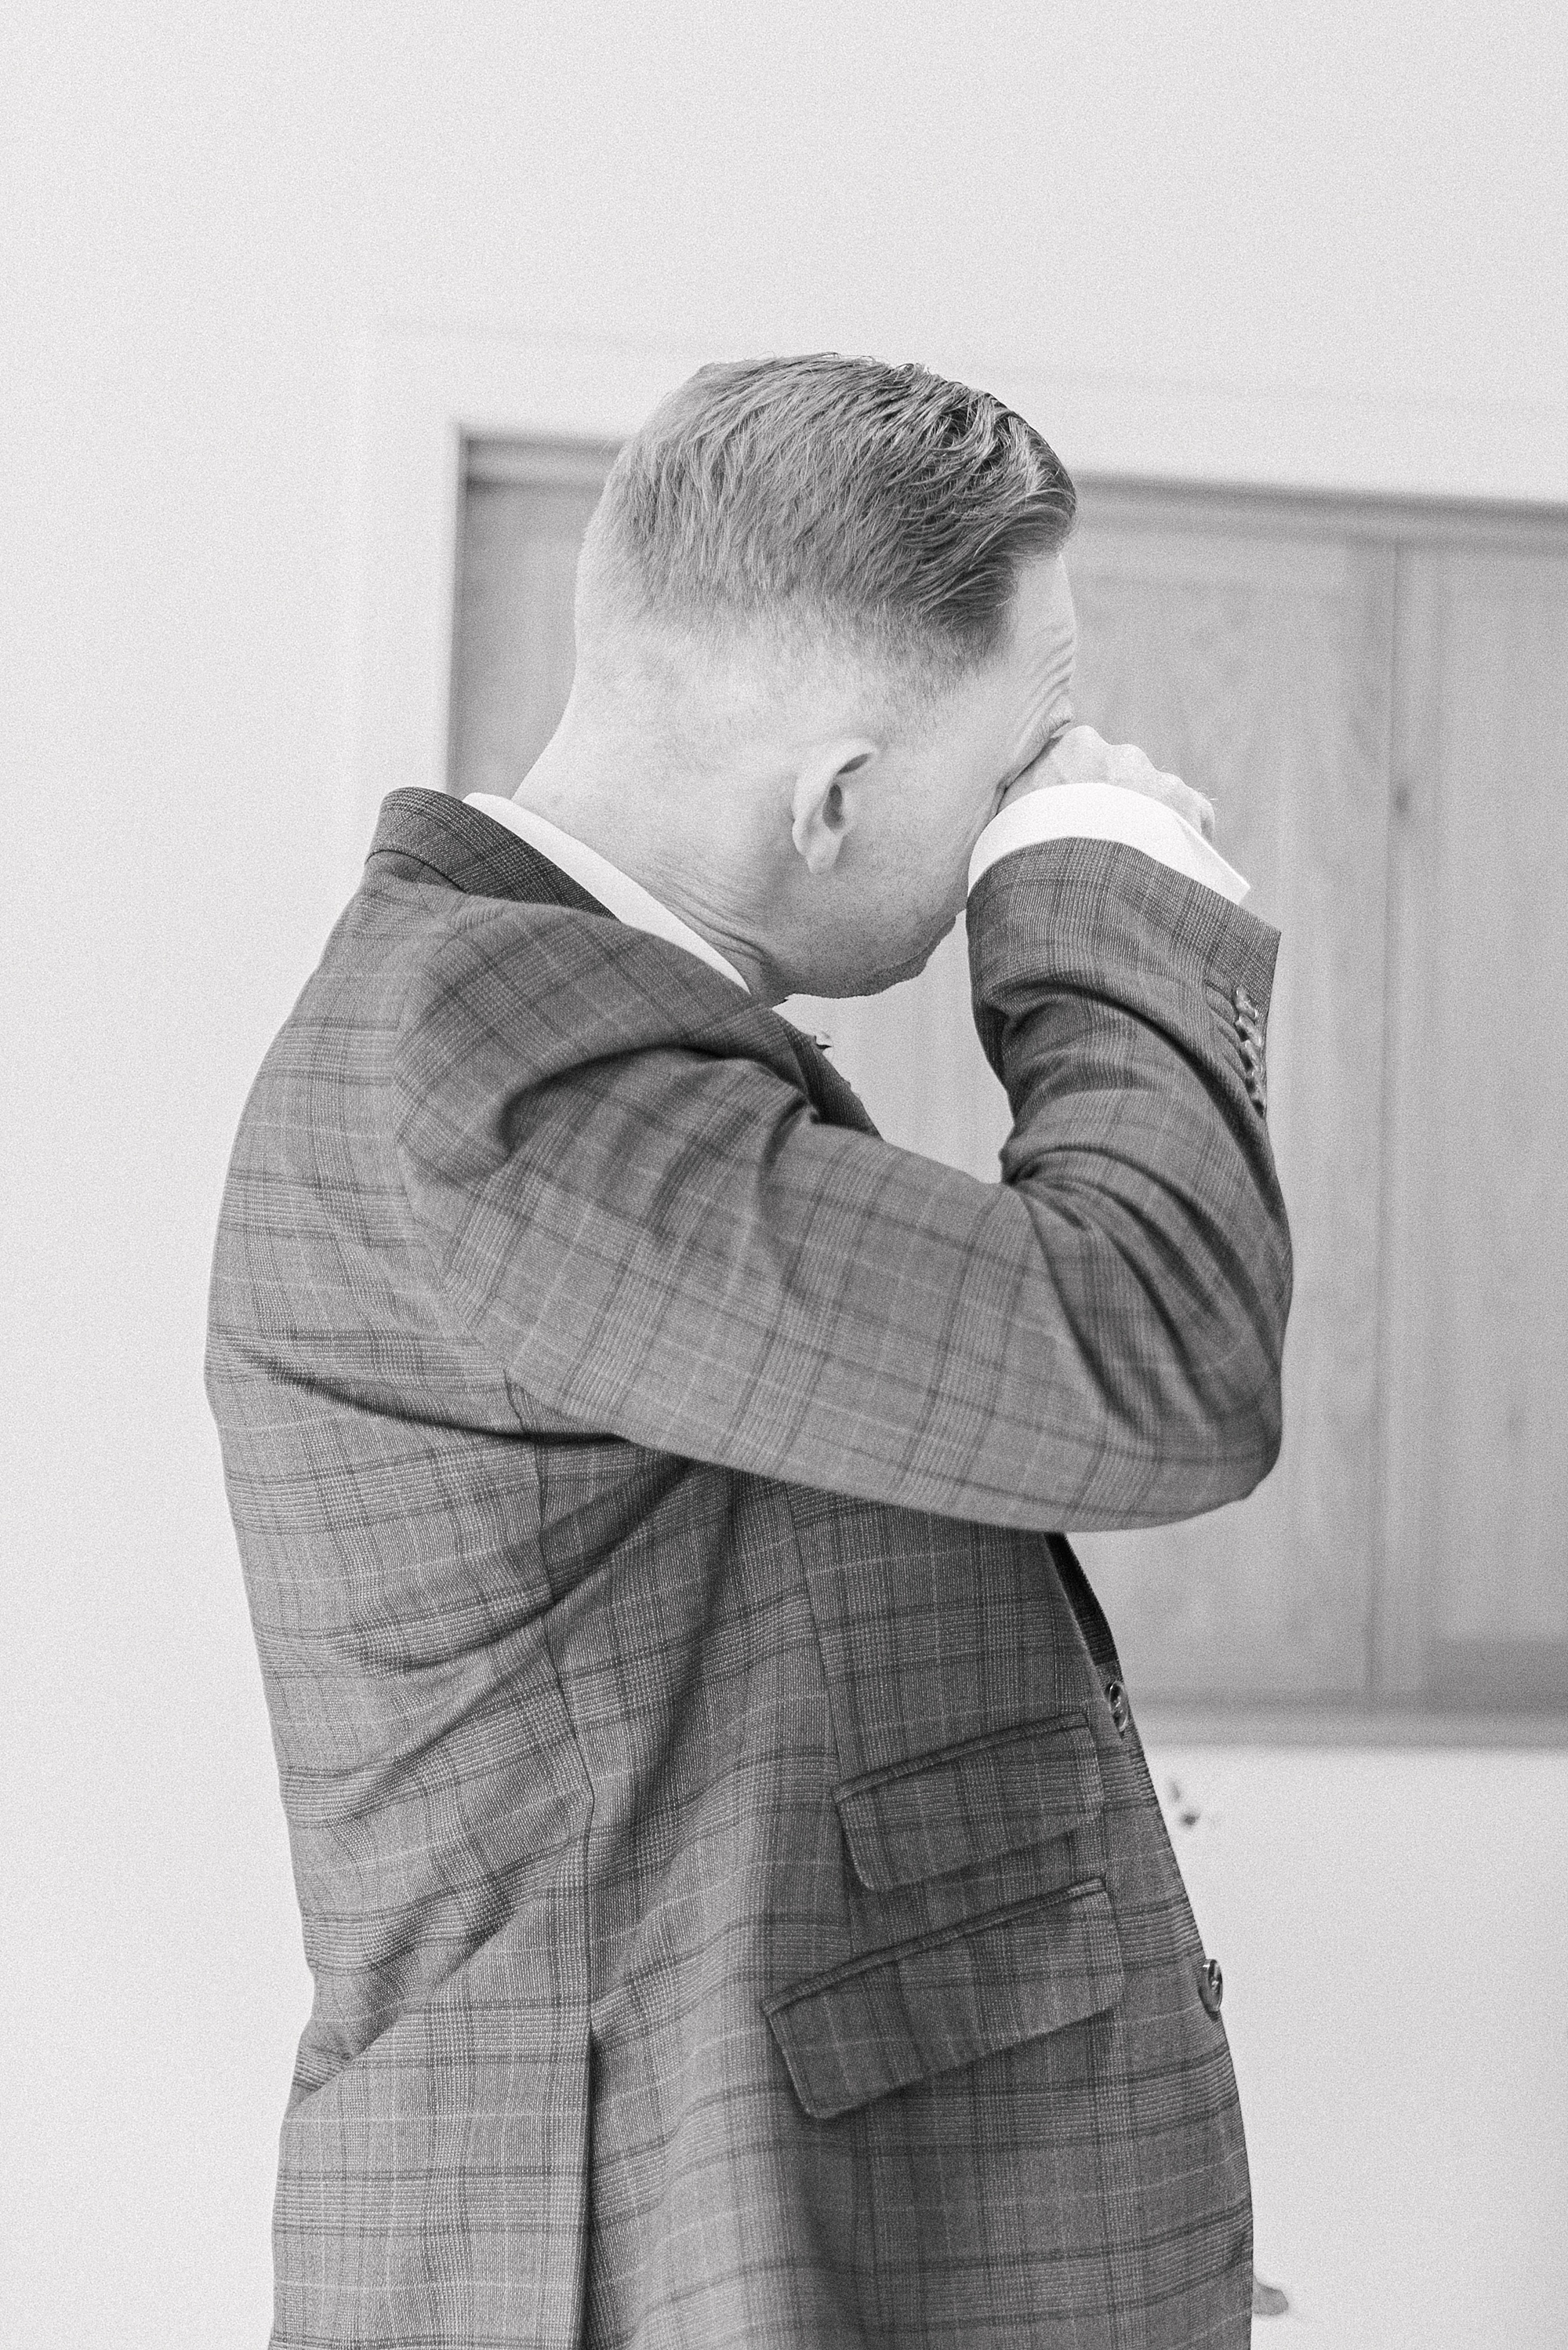 black and white photo of a groom very teary with his hand to his eyes drying a tear watching the bride as she walks down the aisle to be married (the bride isn't in the photo) 